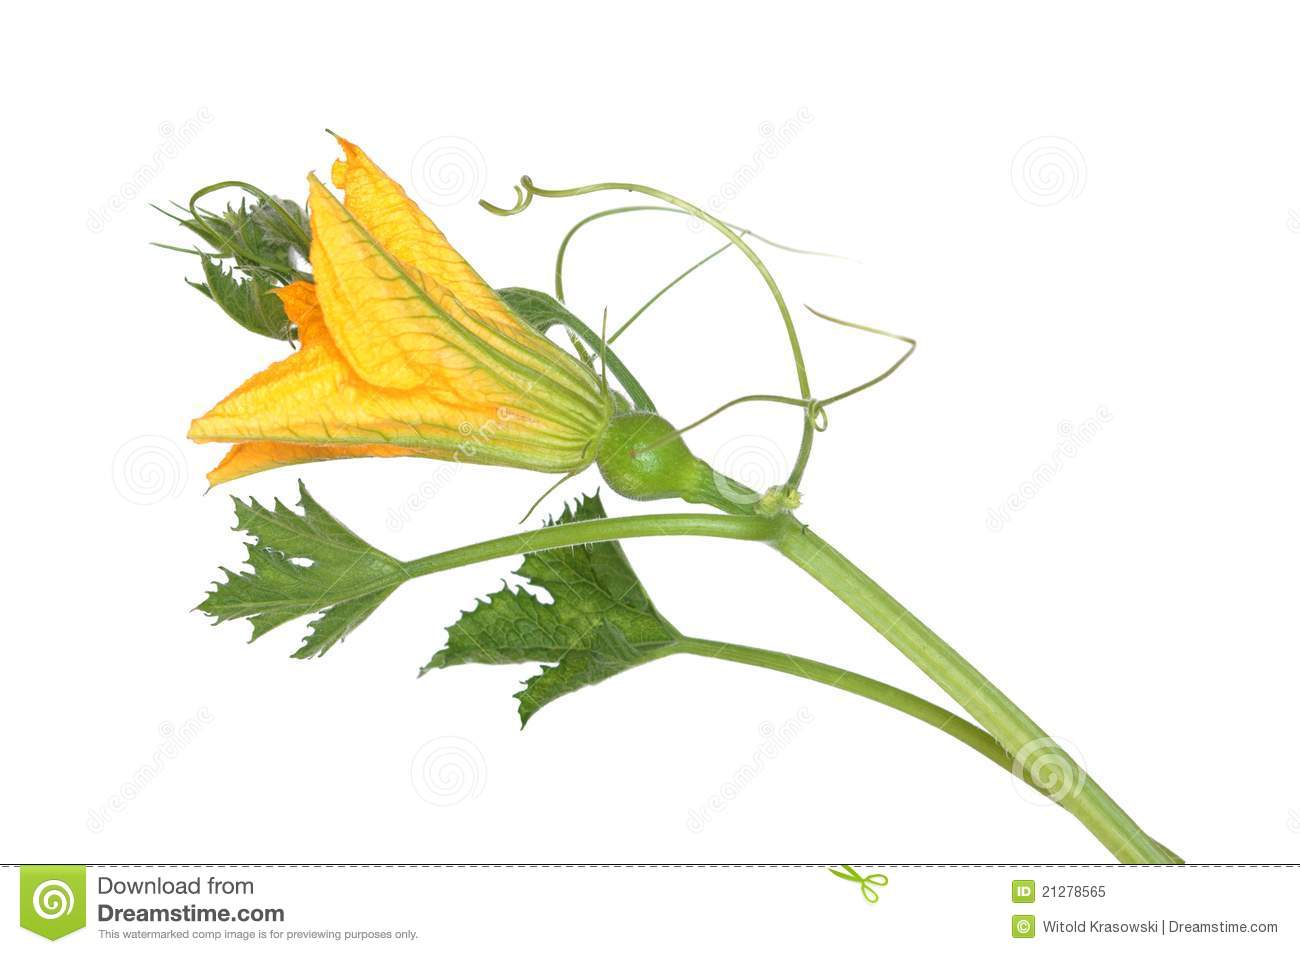 Pumpkin S Stem From Flowers And Leaves On White Background